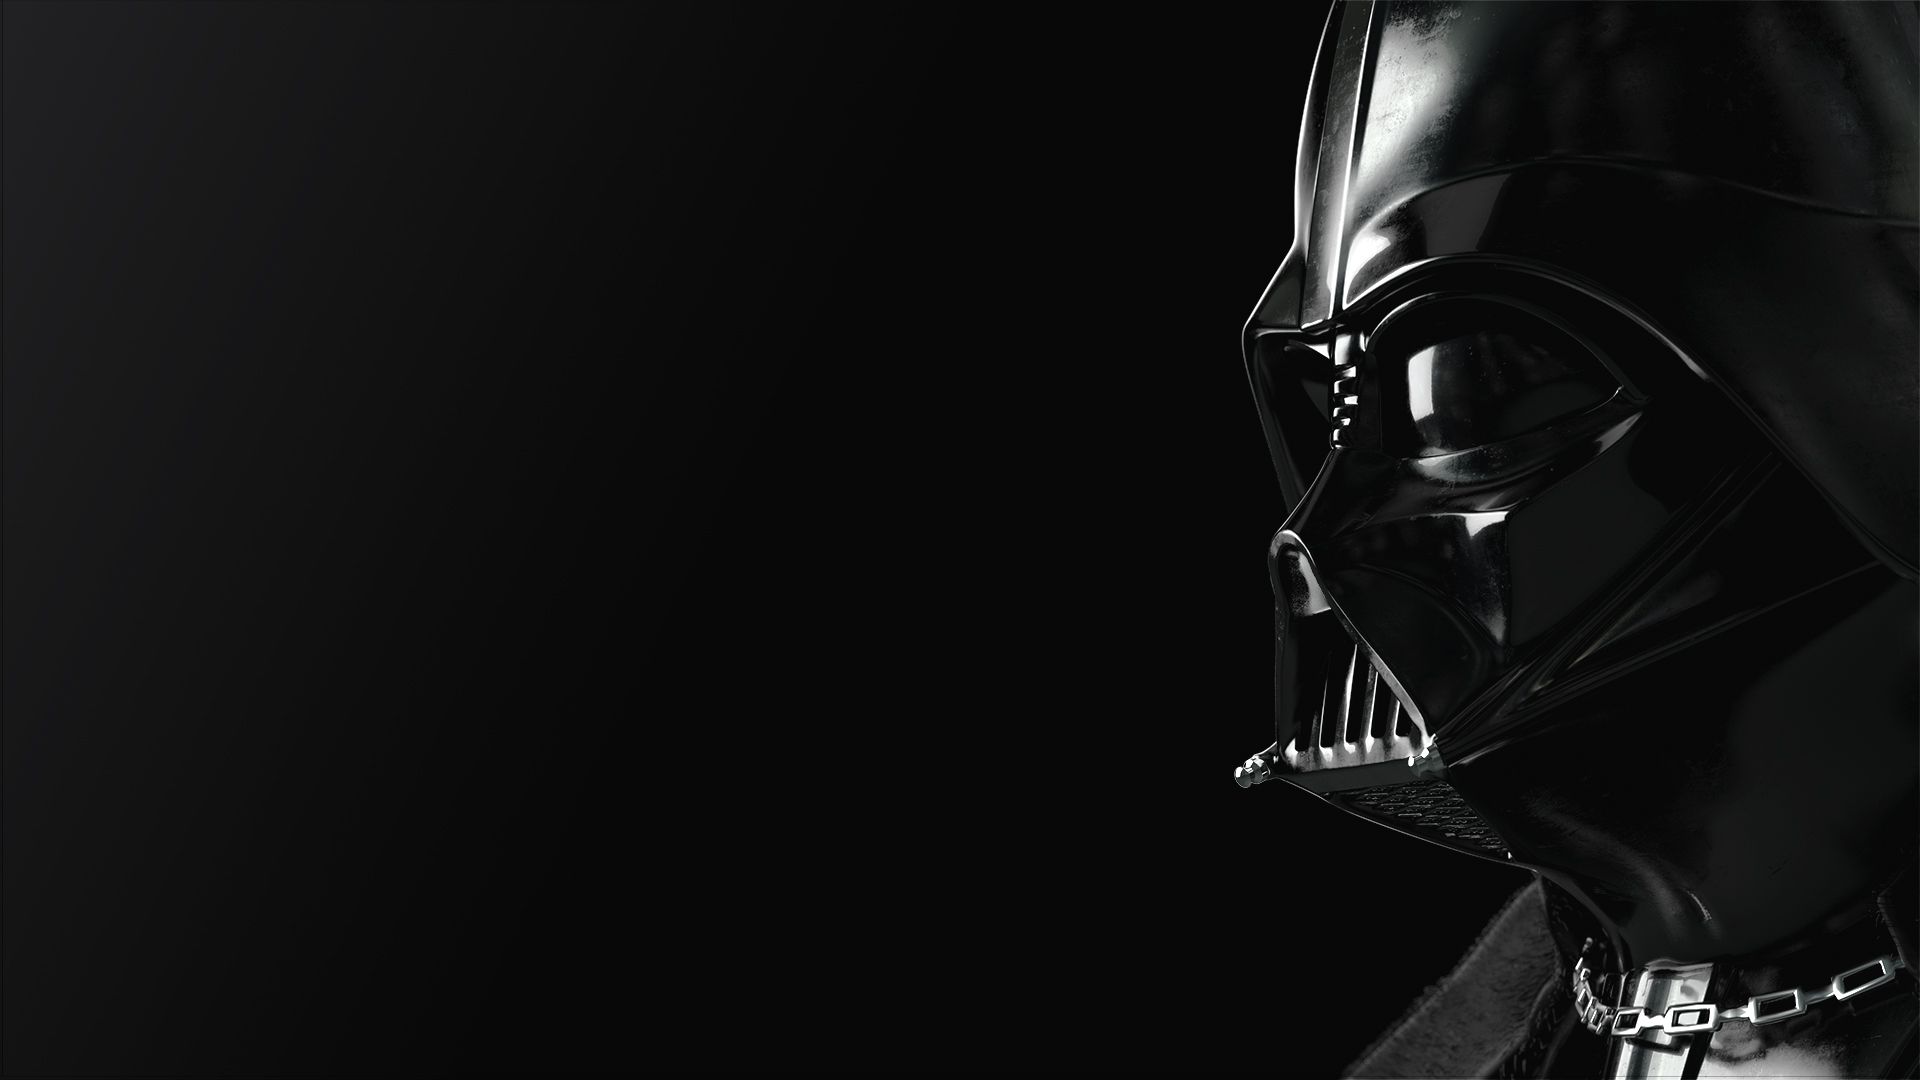 Star Wars Wallpapers 4k PC, Hd Wallpapers & backgrounds Download